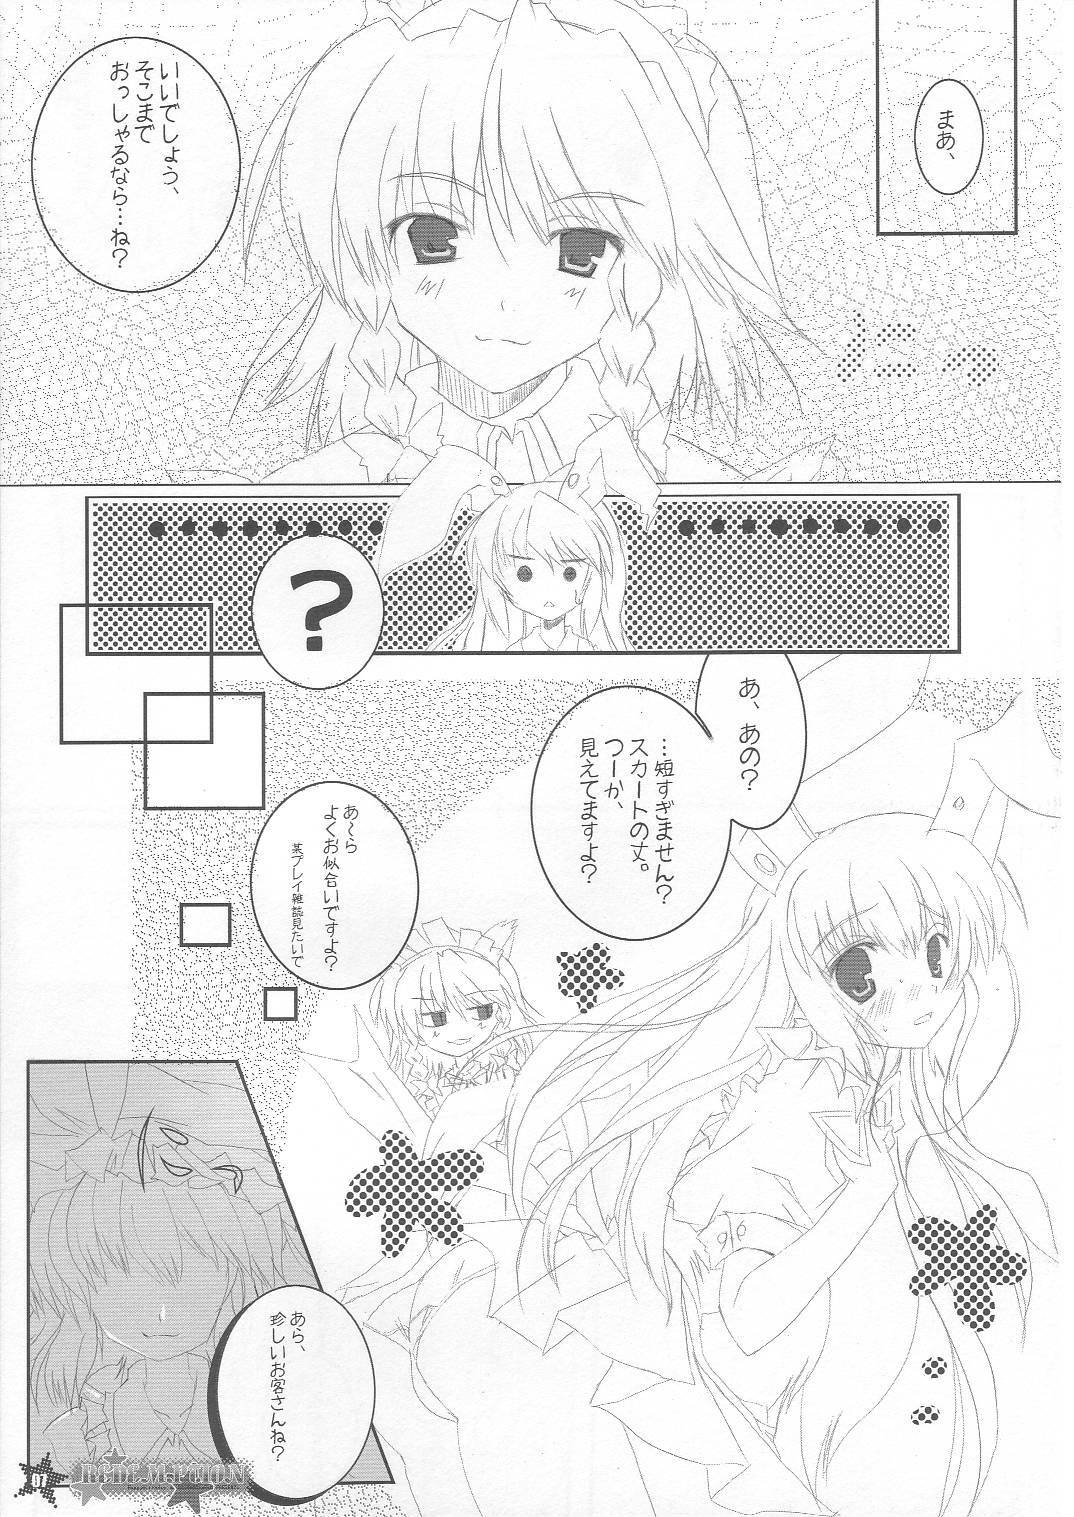 (SC30) [HappyBirthday (Maruchan., Monchy)] REDEMPTION (Touhou Project) page 6 full